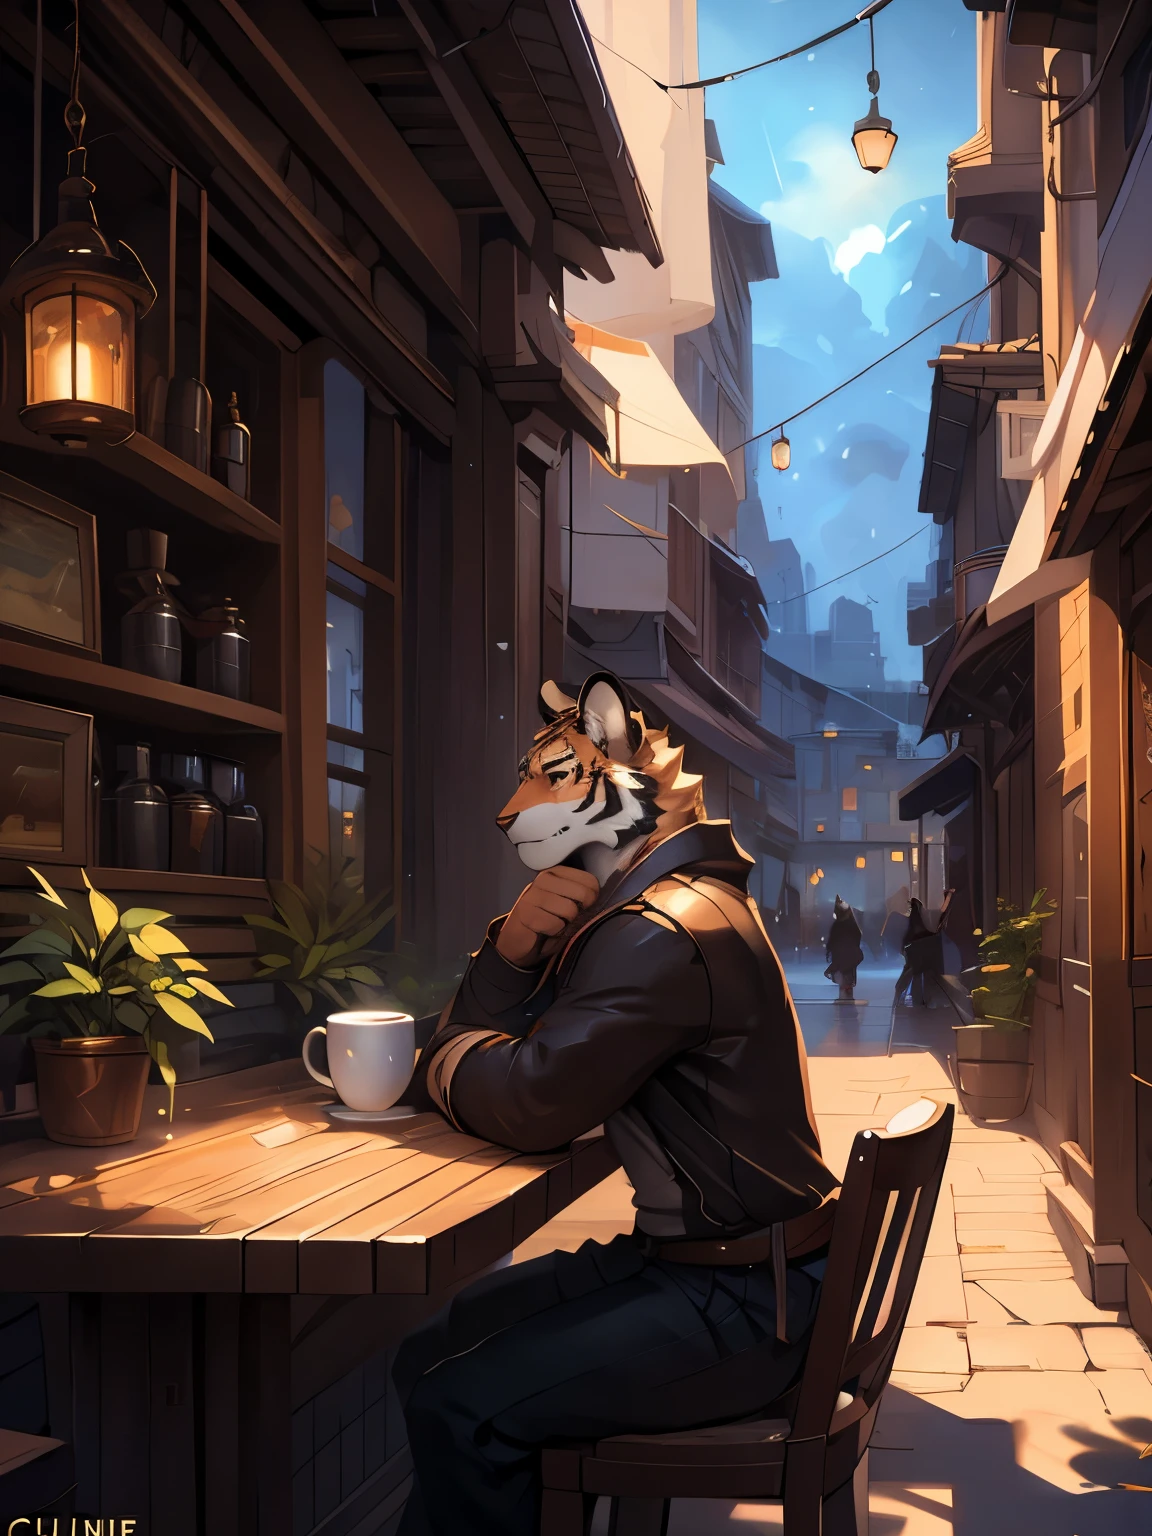 4k, 8k, high resolution, best quality, perfect colors, perfect shadows, perfect lighting, posted on e621, (by Chunie, by canyne khai, by t.y.starale), male, furry, anthro Tiger, rain, (Realistic eye details 1.3), armed,sad expression,white wolf, night, handsome, sitting,coffee,coffee shop, Realistic background, masterpiece, dramatic lighting, soft lighting, day, highly detail, Hair coiled, casual clothes, Detailed fur, Detailed face, Perfect face, Detailed background, (Complex), (Super Detail), (Ultra Clear), (Best Quality)